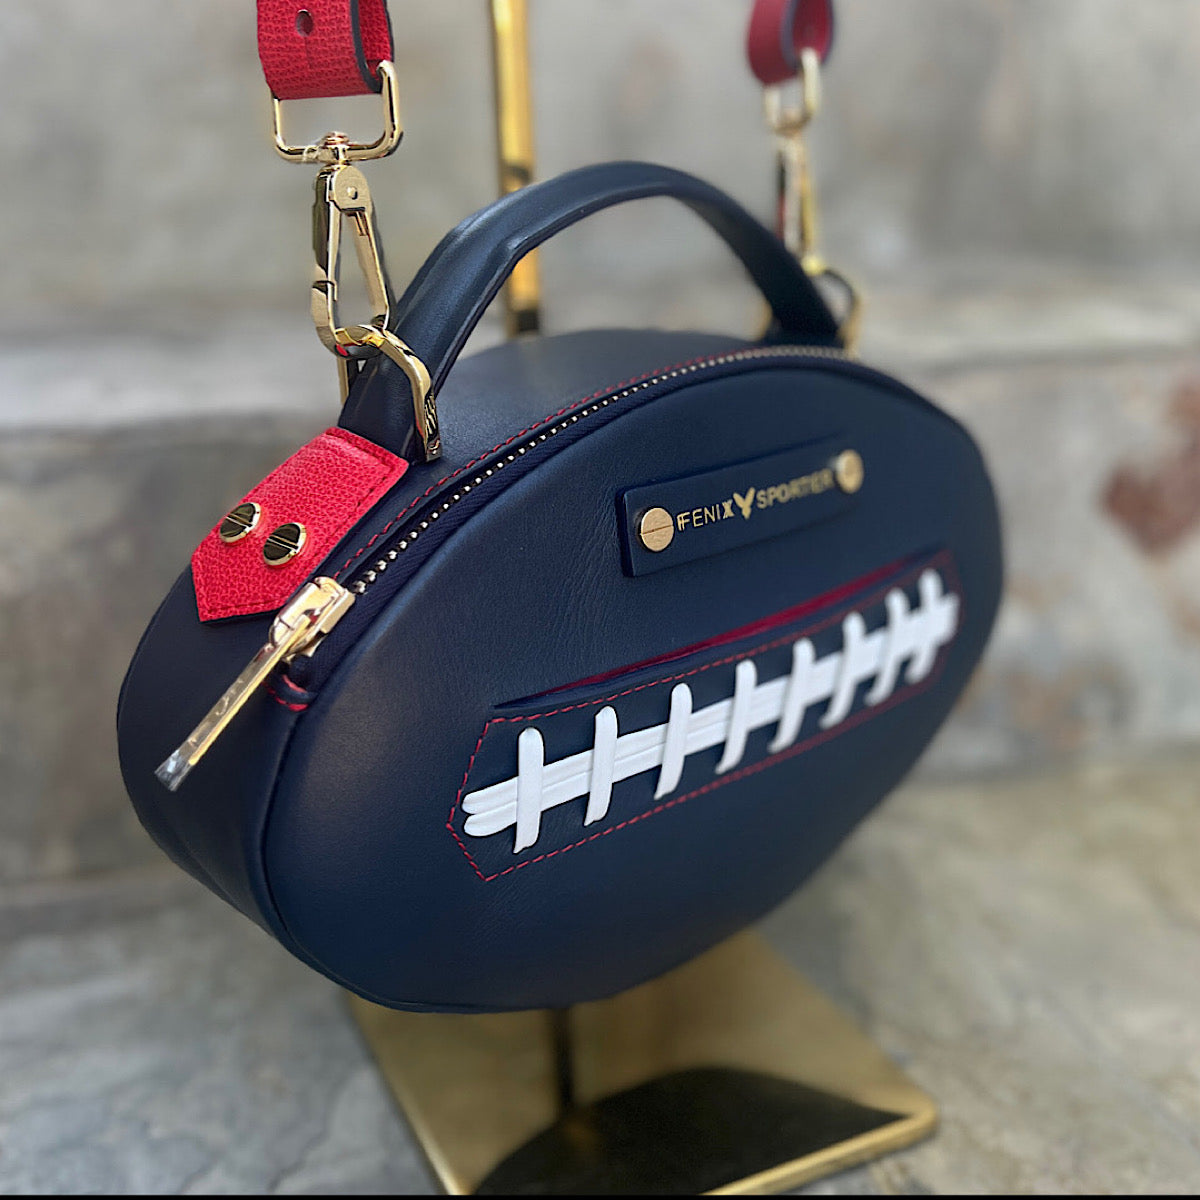 The Football Bag - Navy / Red / White Gold